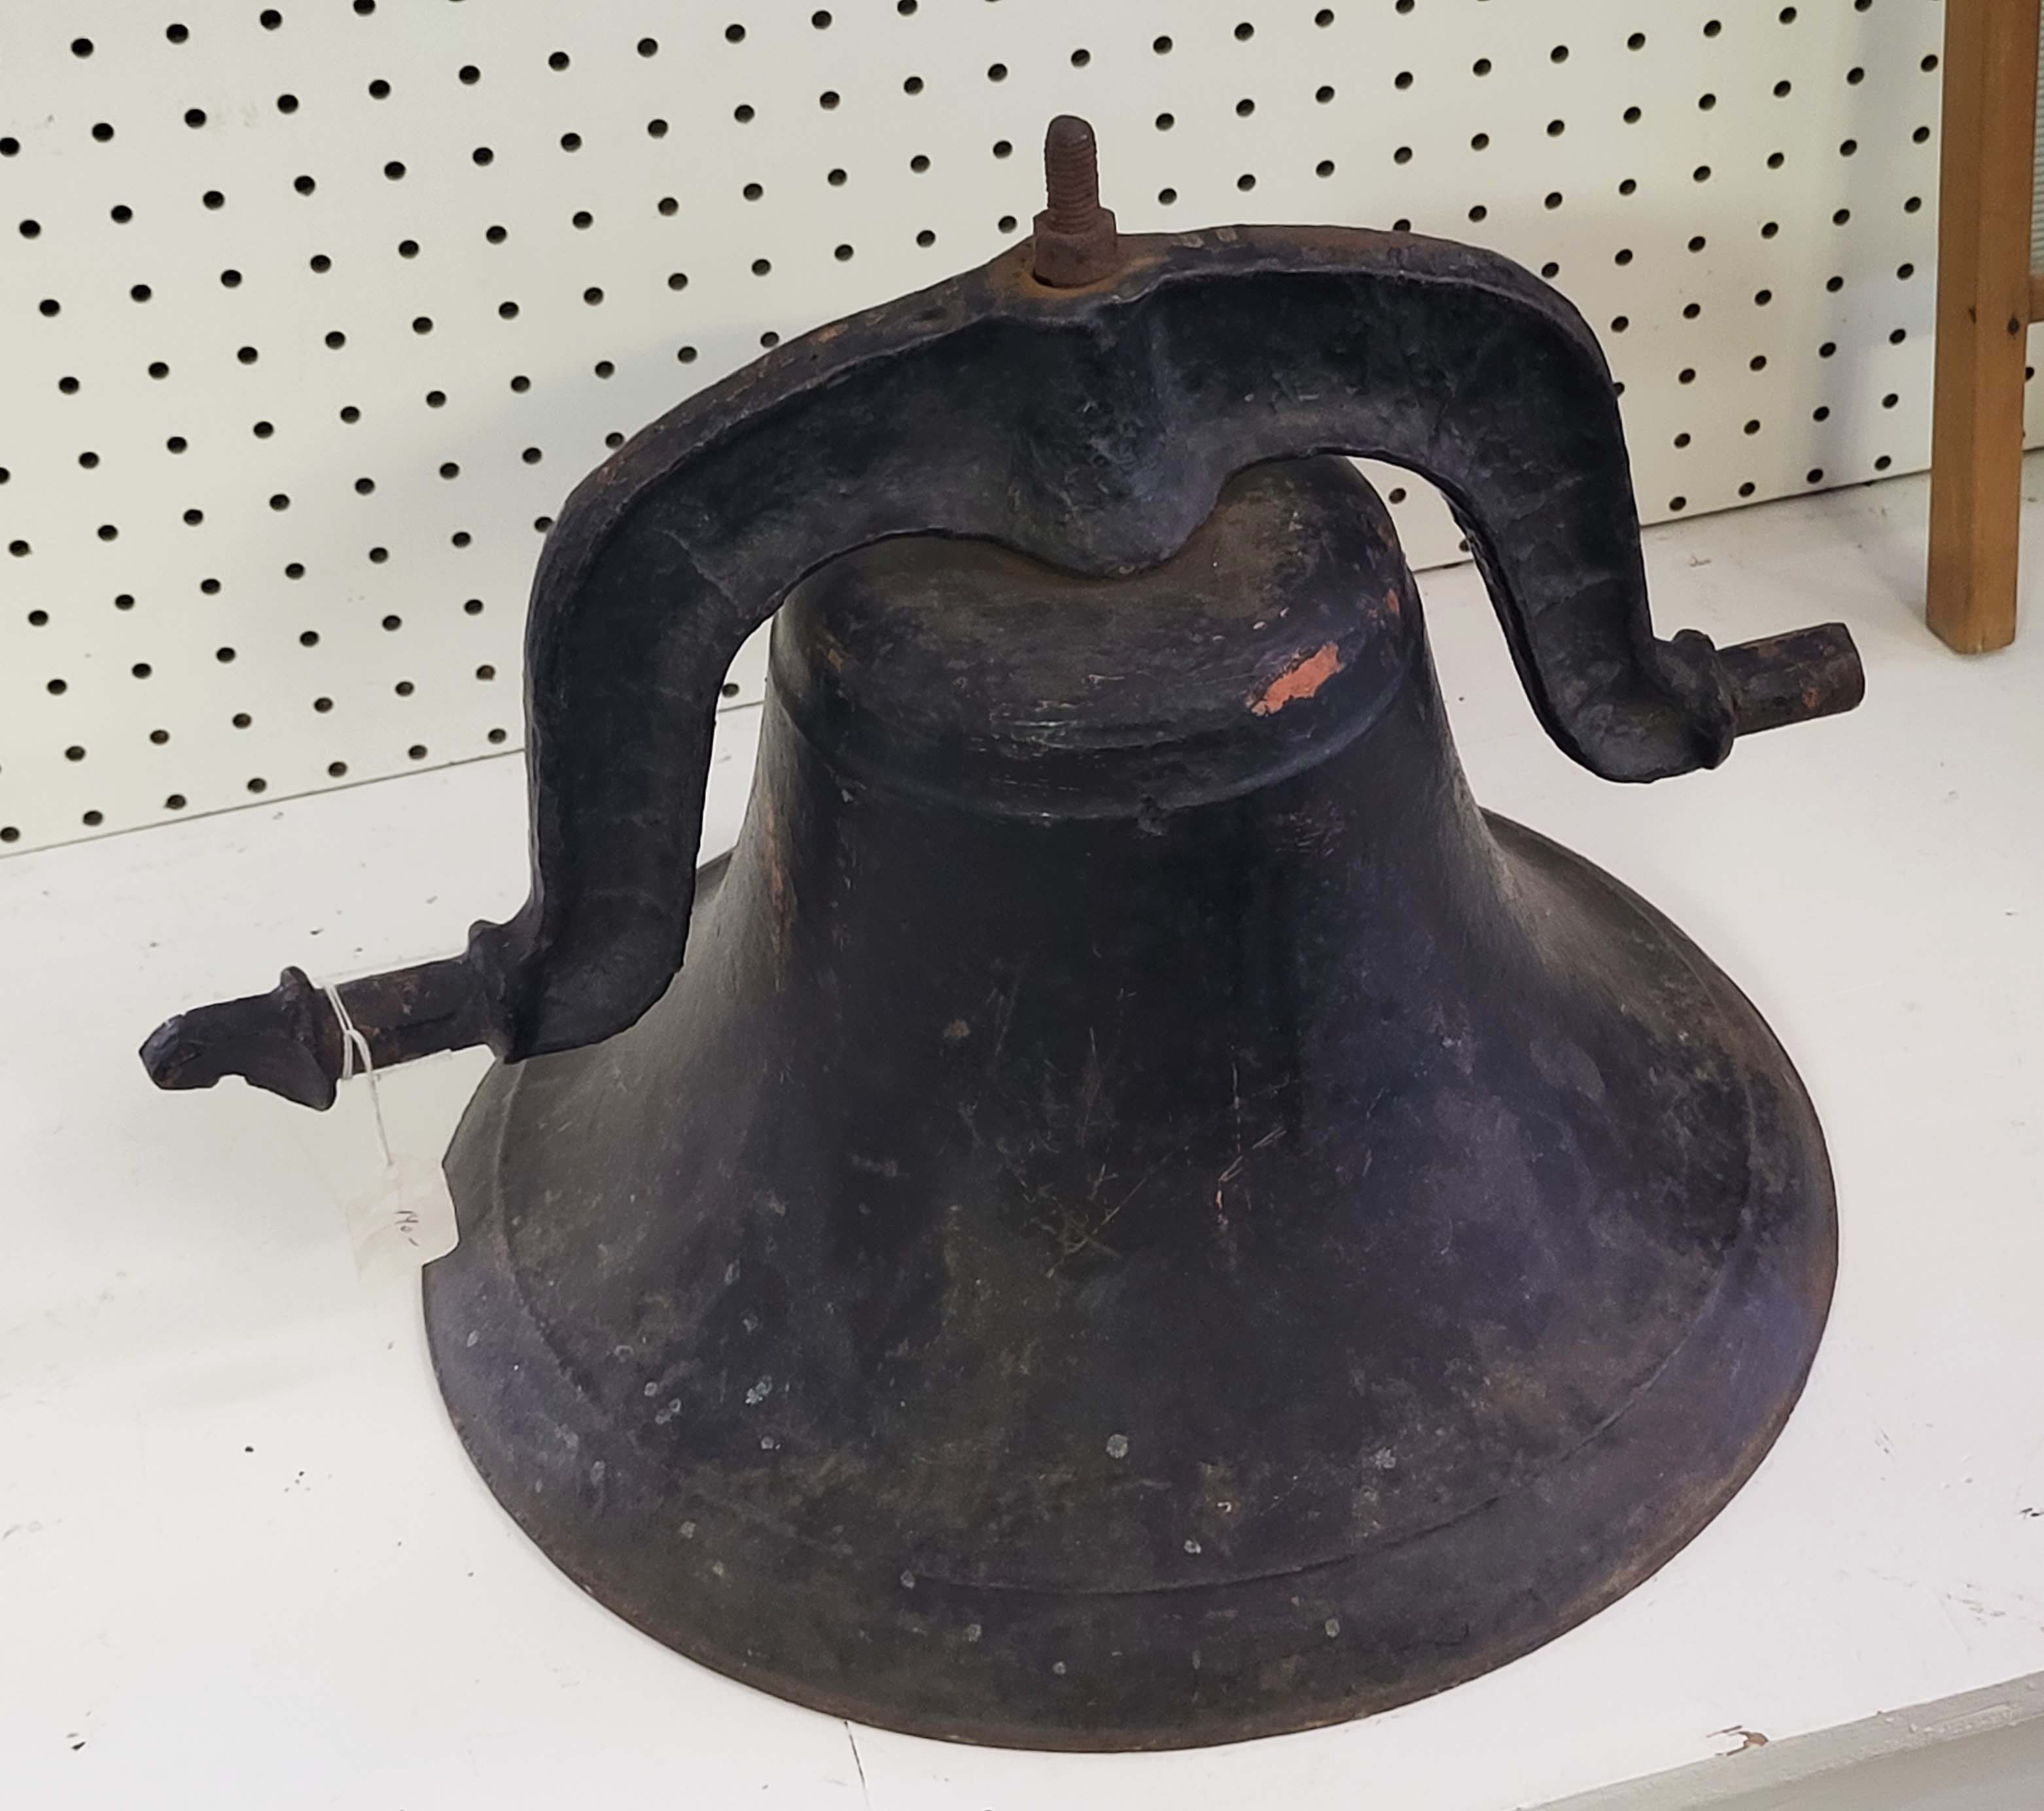 LARGE CAST IRON BELL